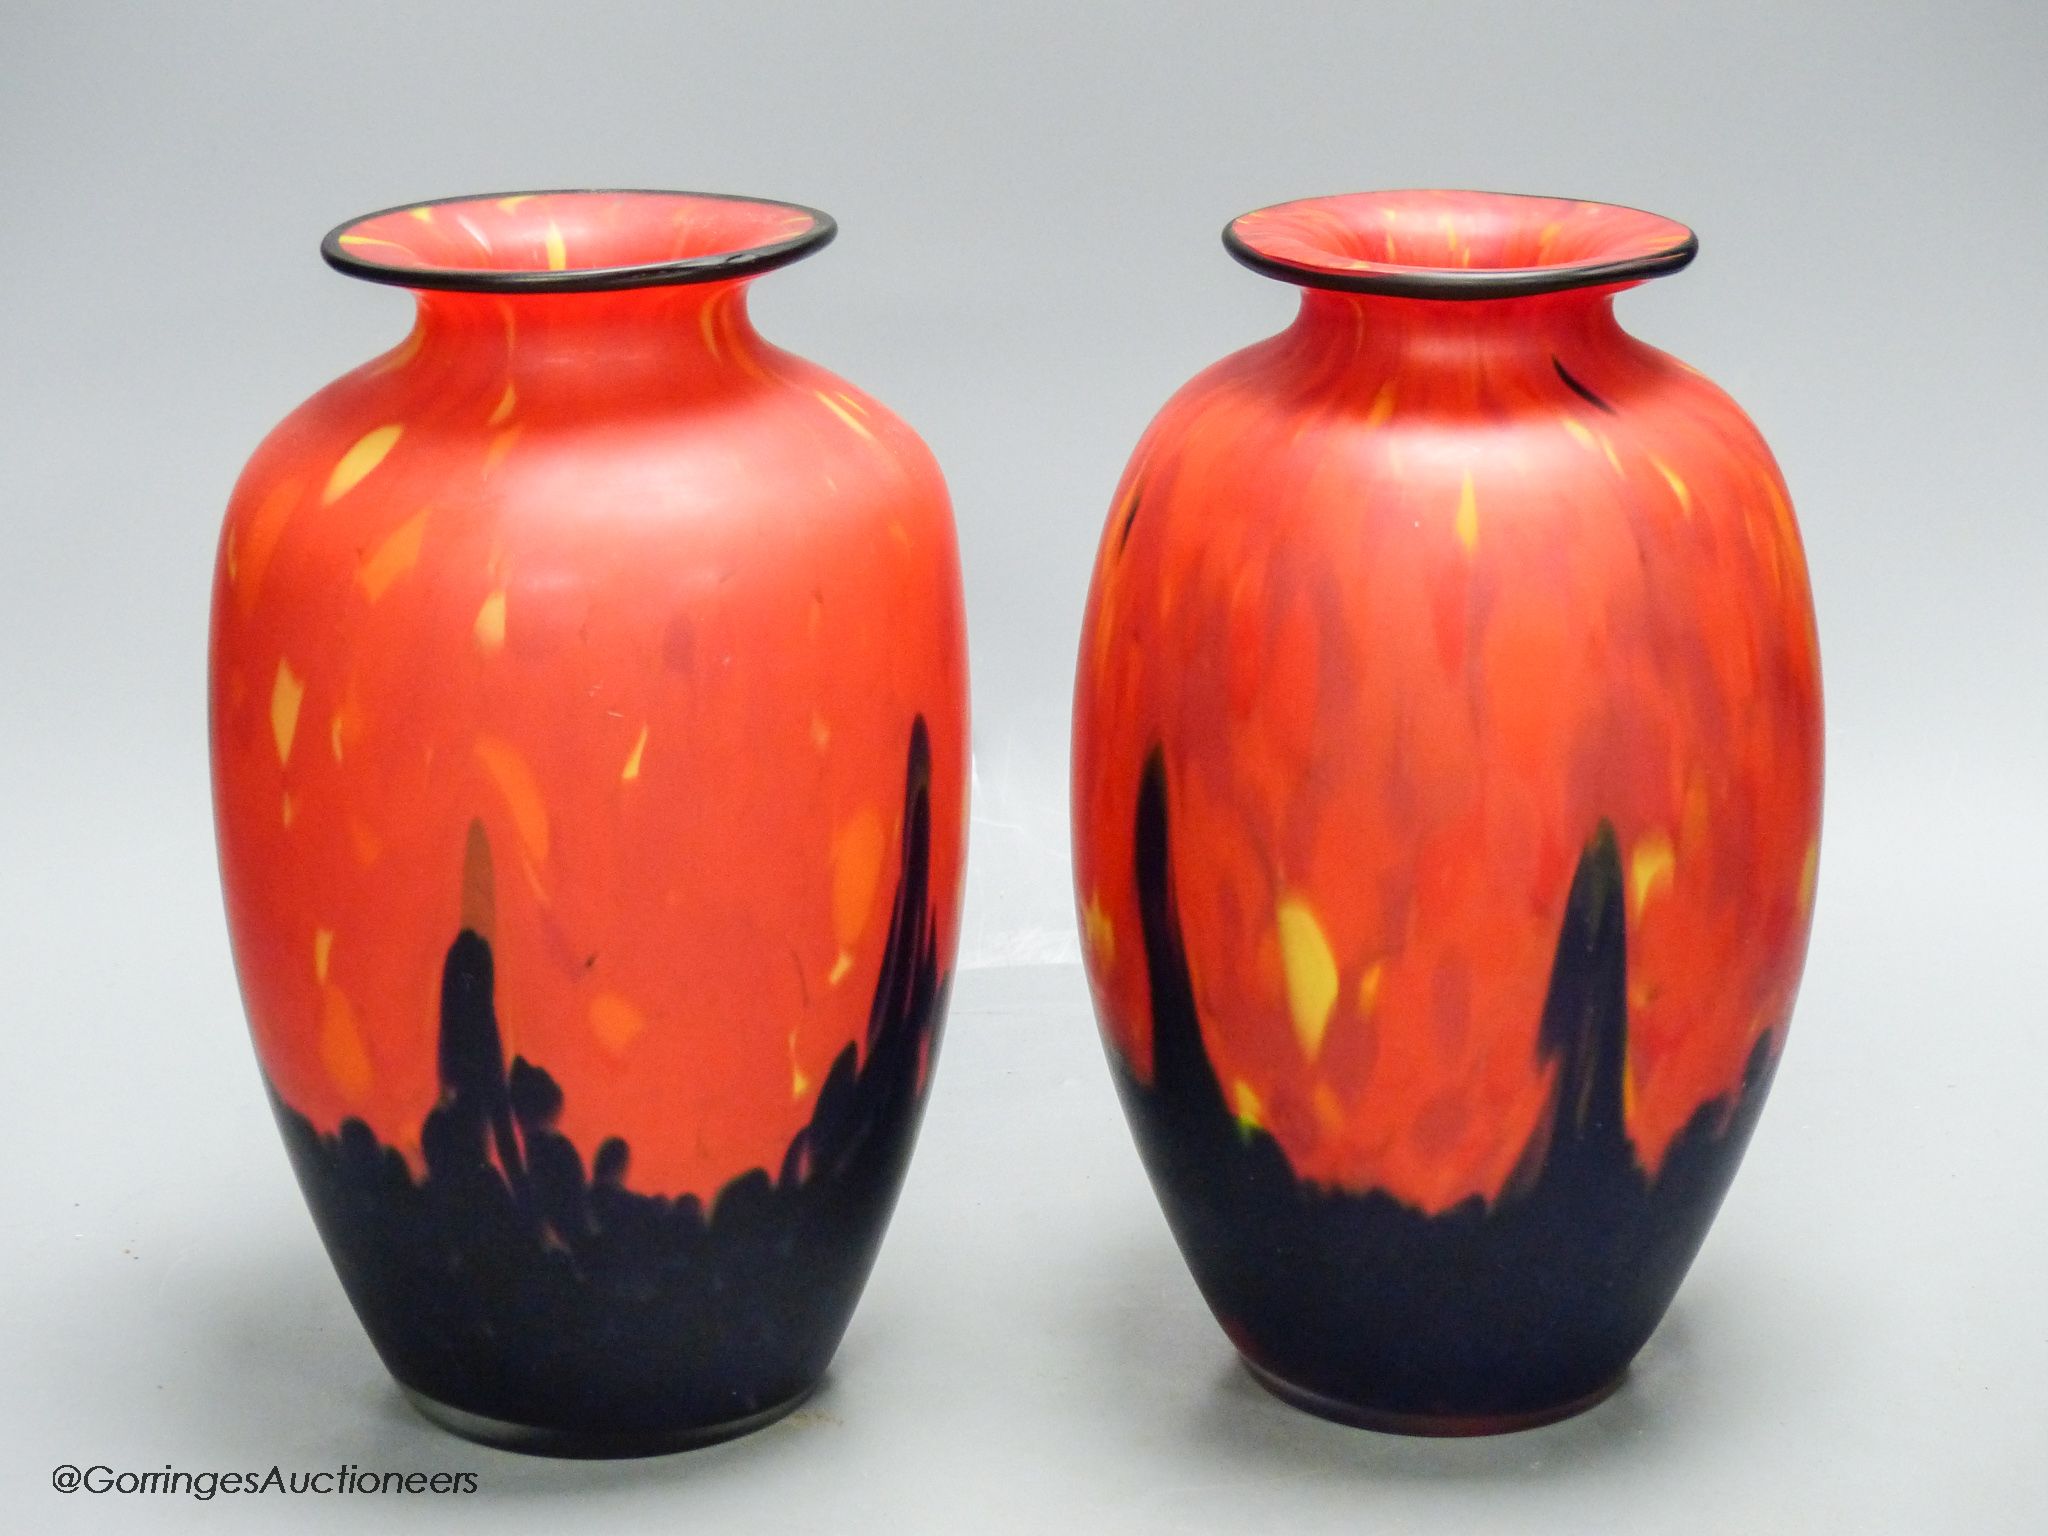 A pair of modern red and black art glass vases, height 23cm